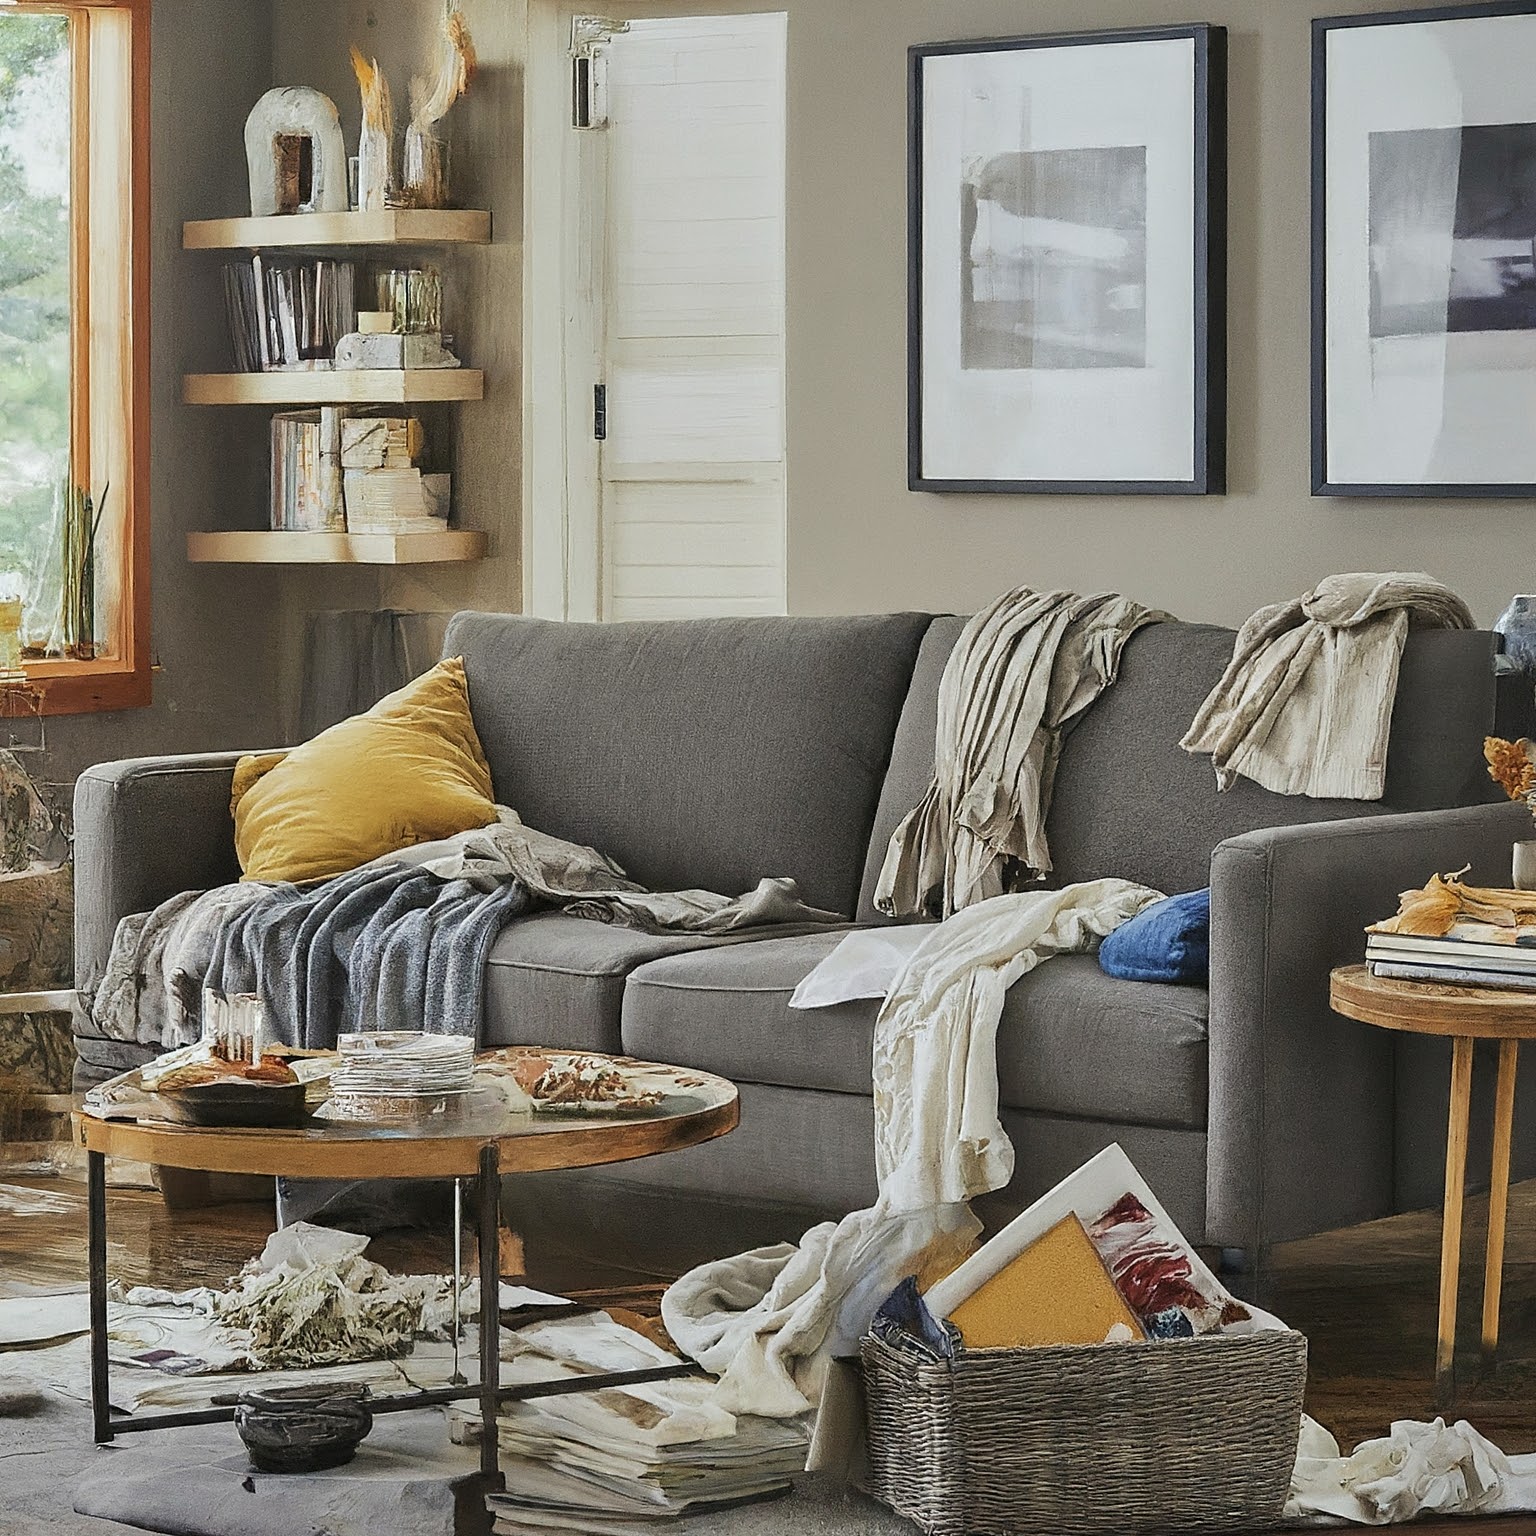 The BEST Top 10 Guide to Apartment Cleaning